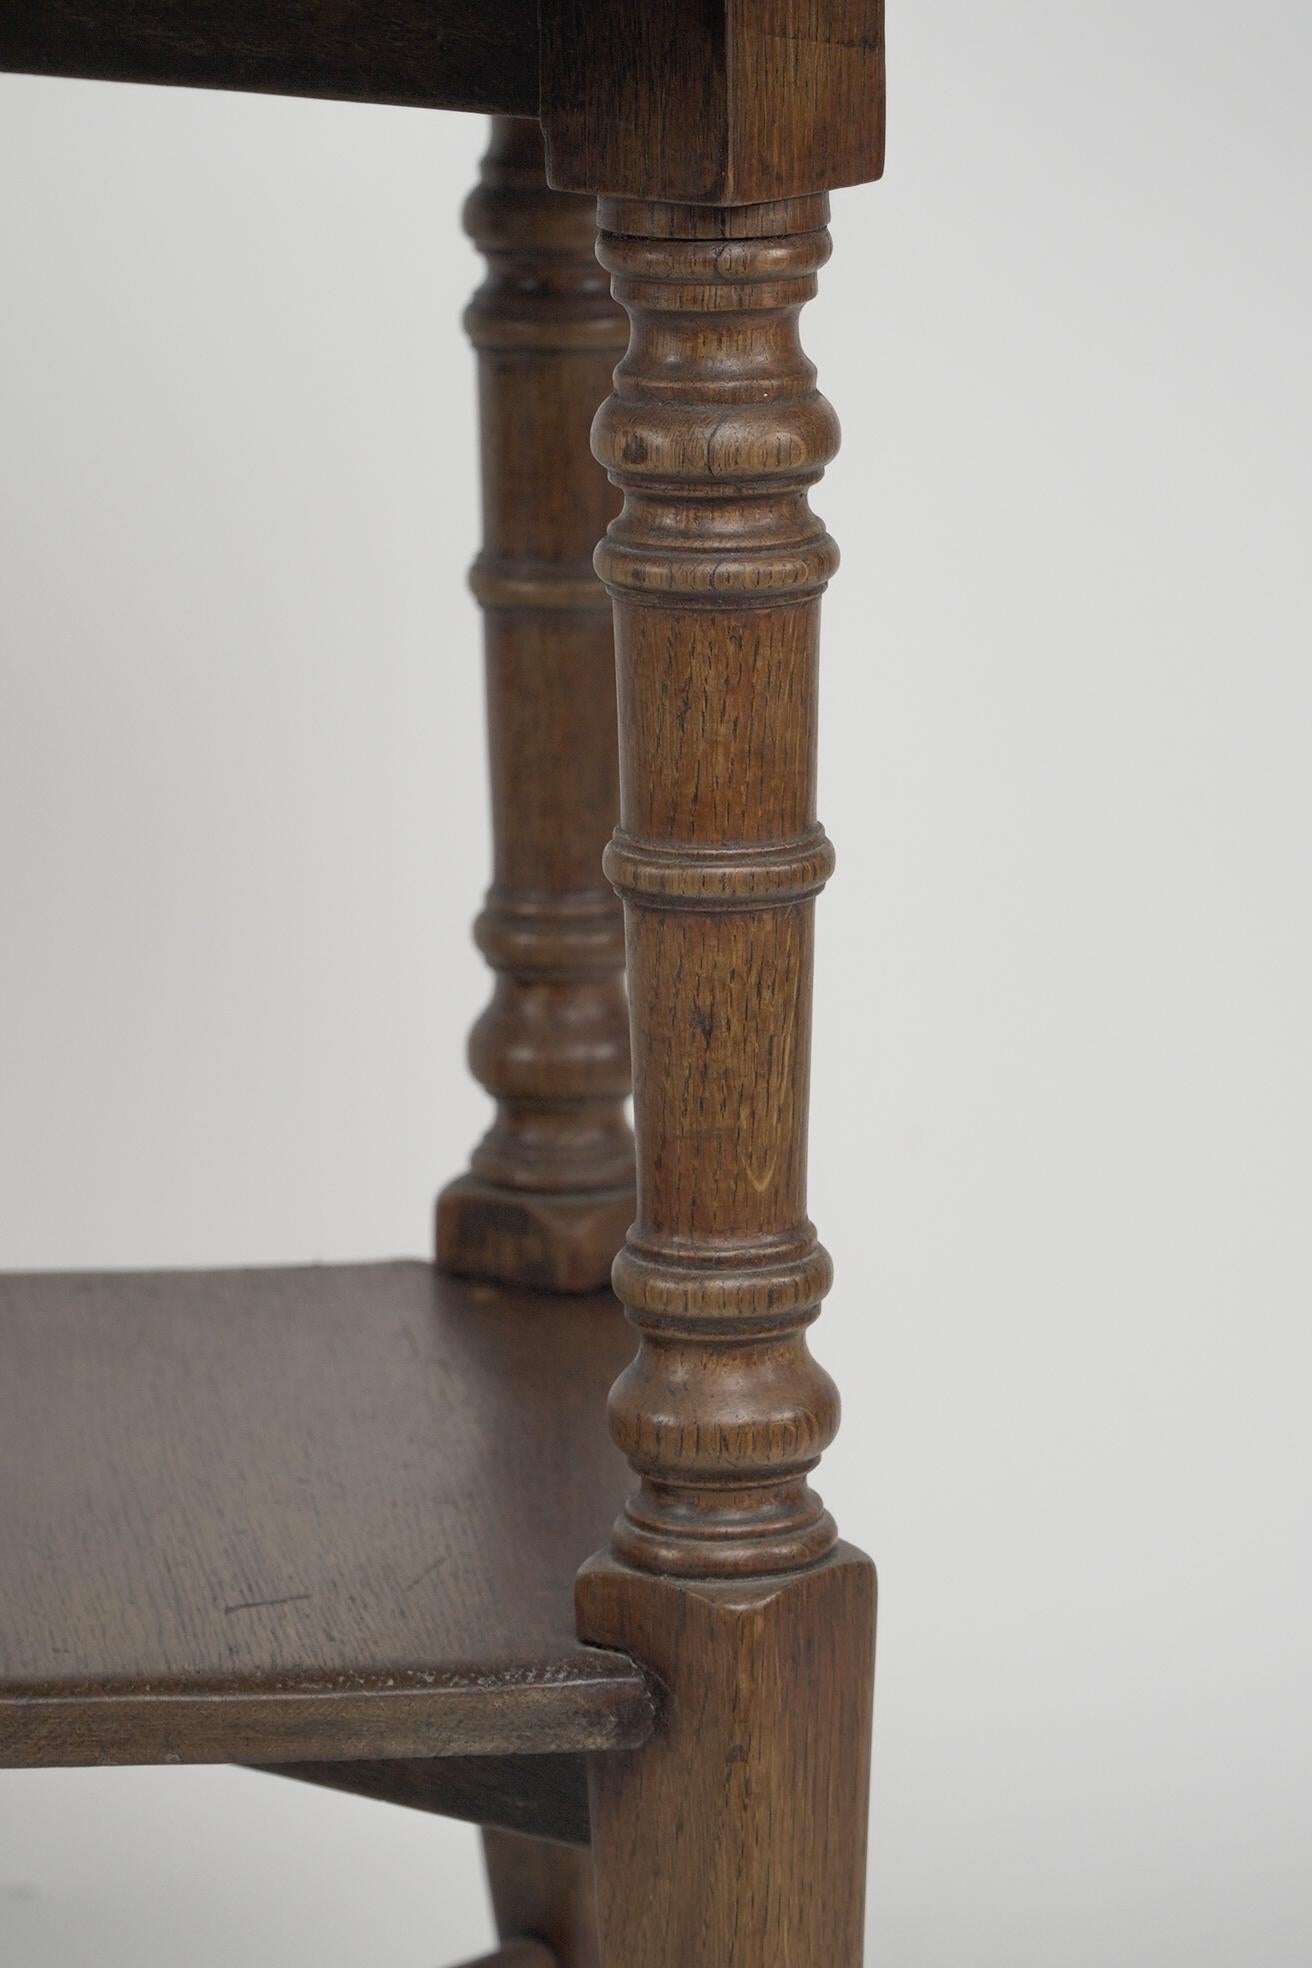 Jas Shoolbred and Co (attributed) An octagonal oak side table with central shelf For Sale 2